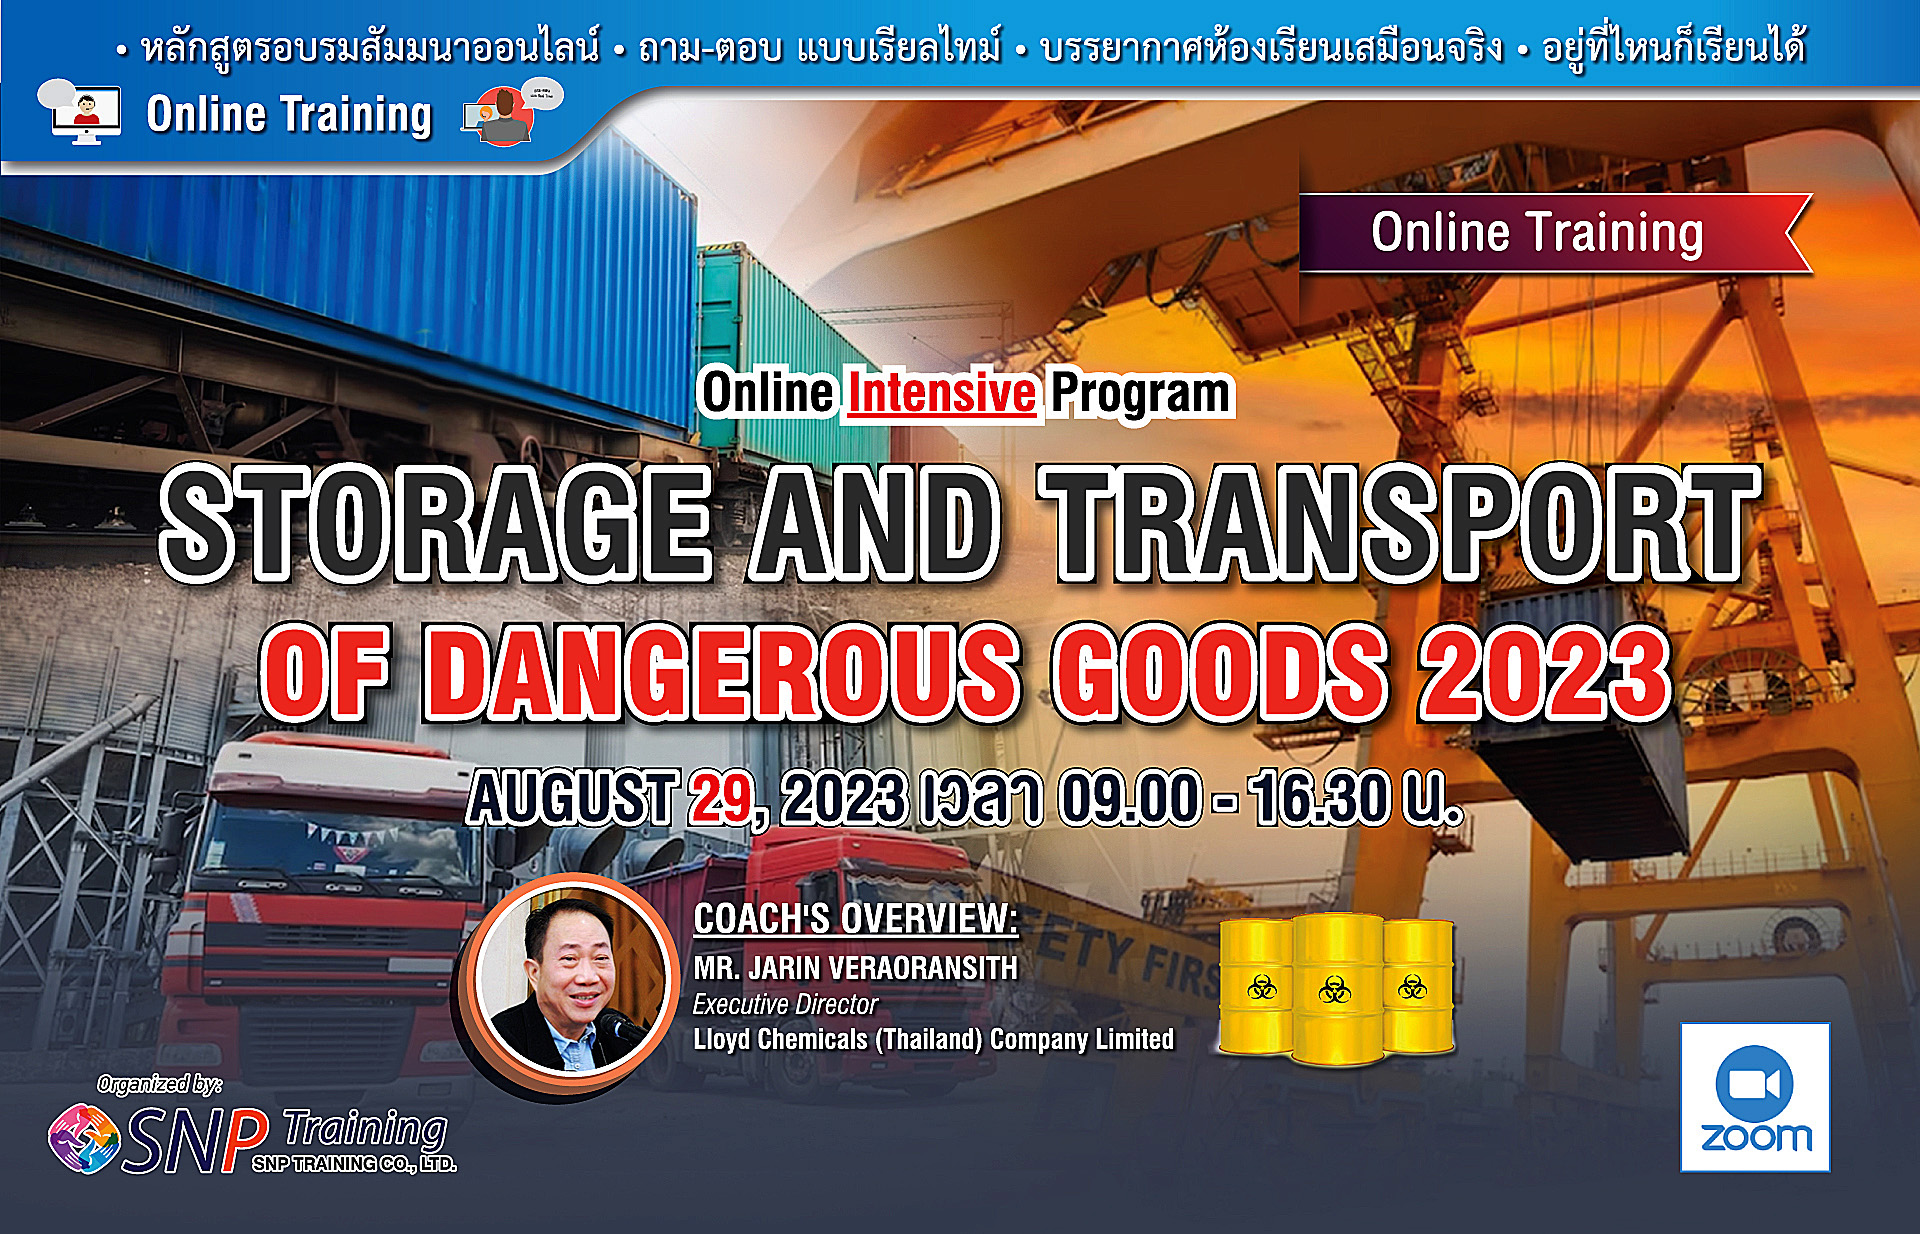 Storage and Transport of Dangerous Goods 2023